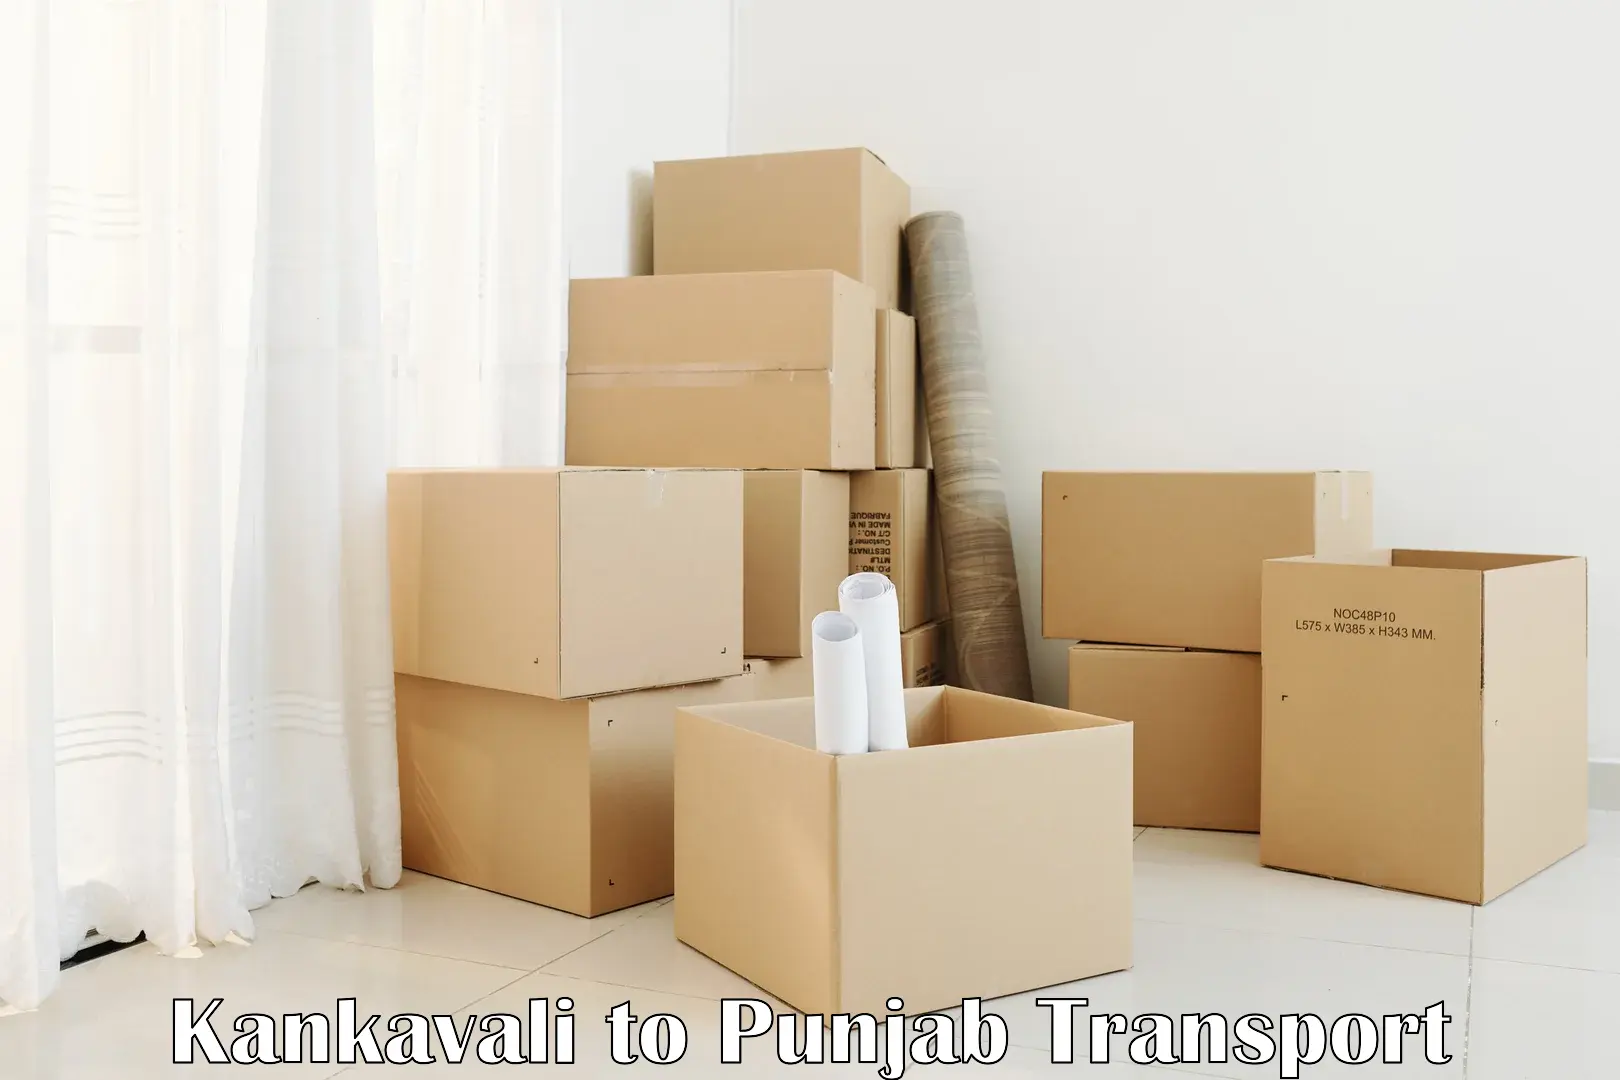 Nationwide transport services Kankavali to Ludhiana